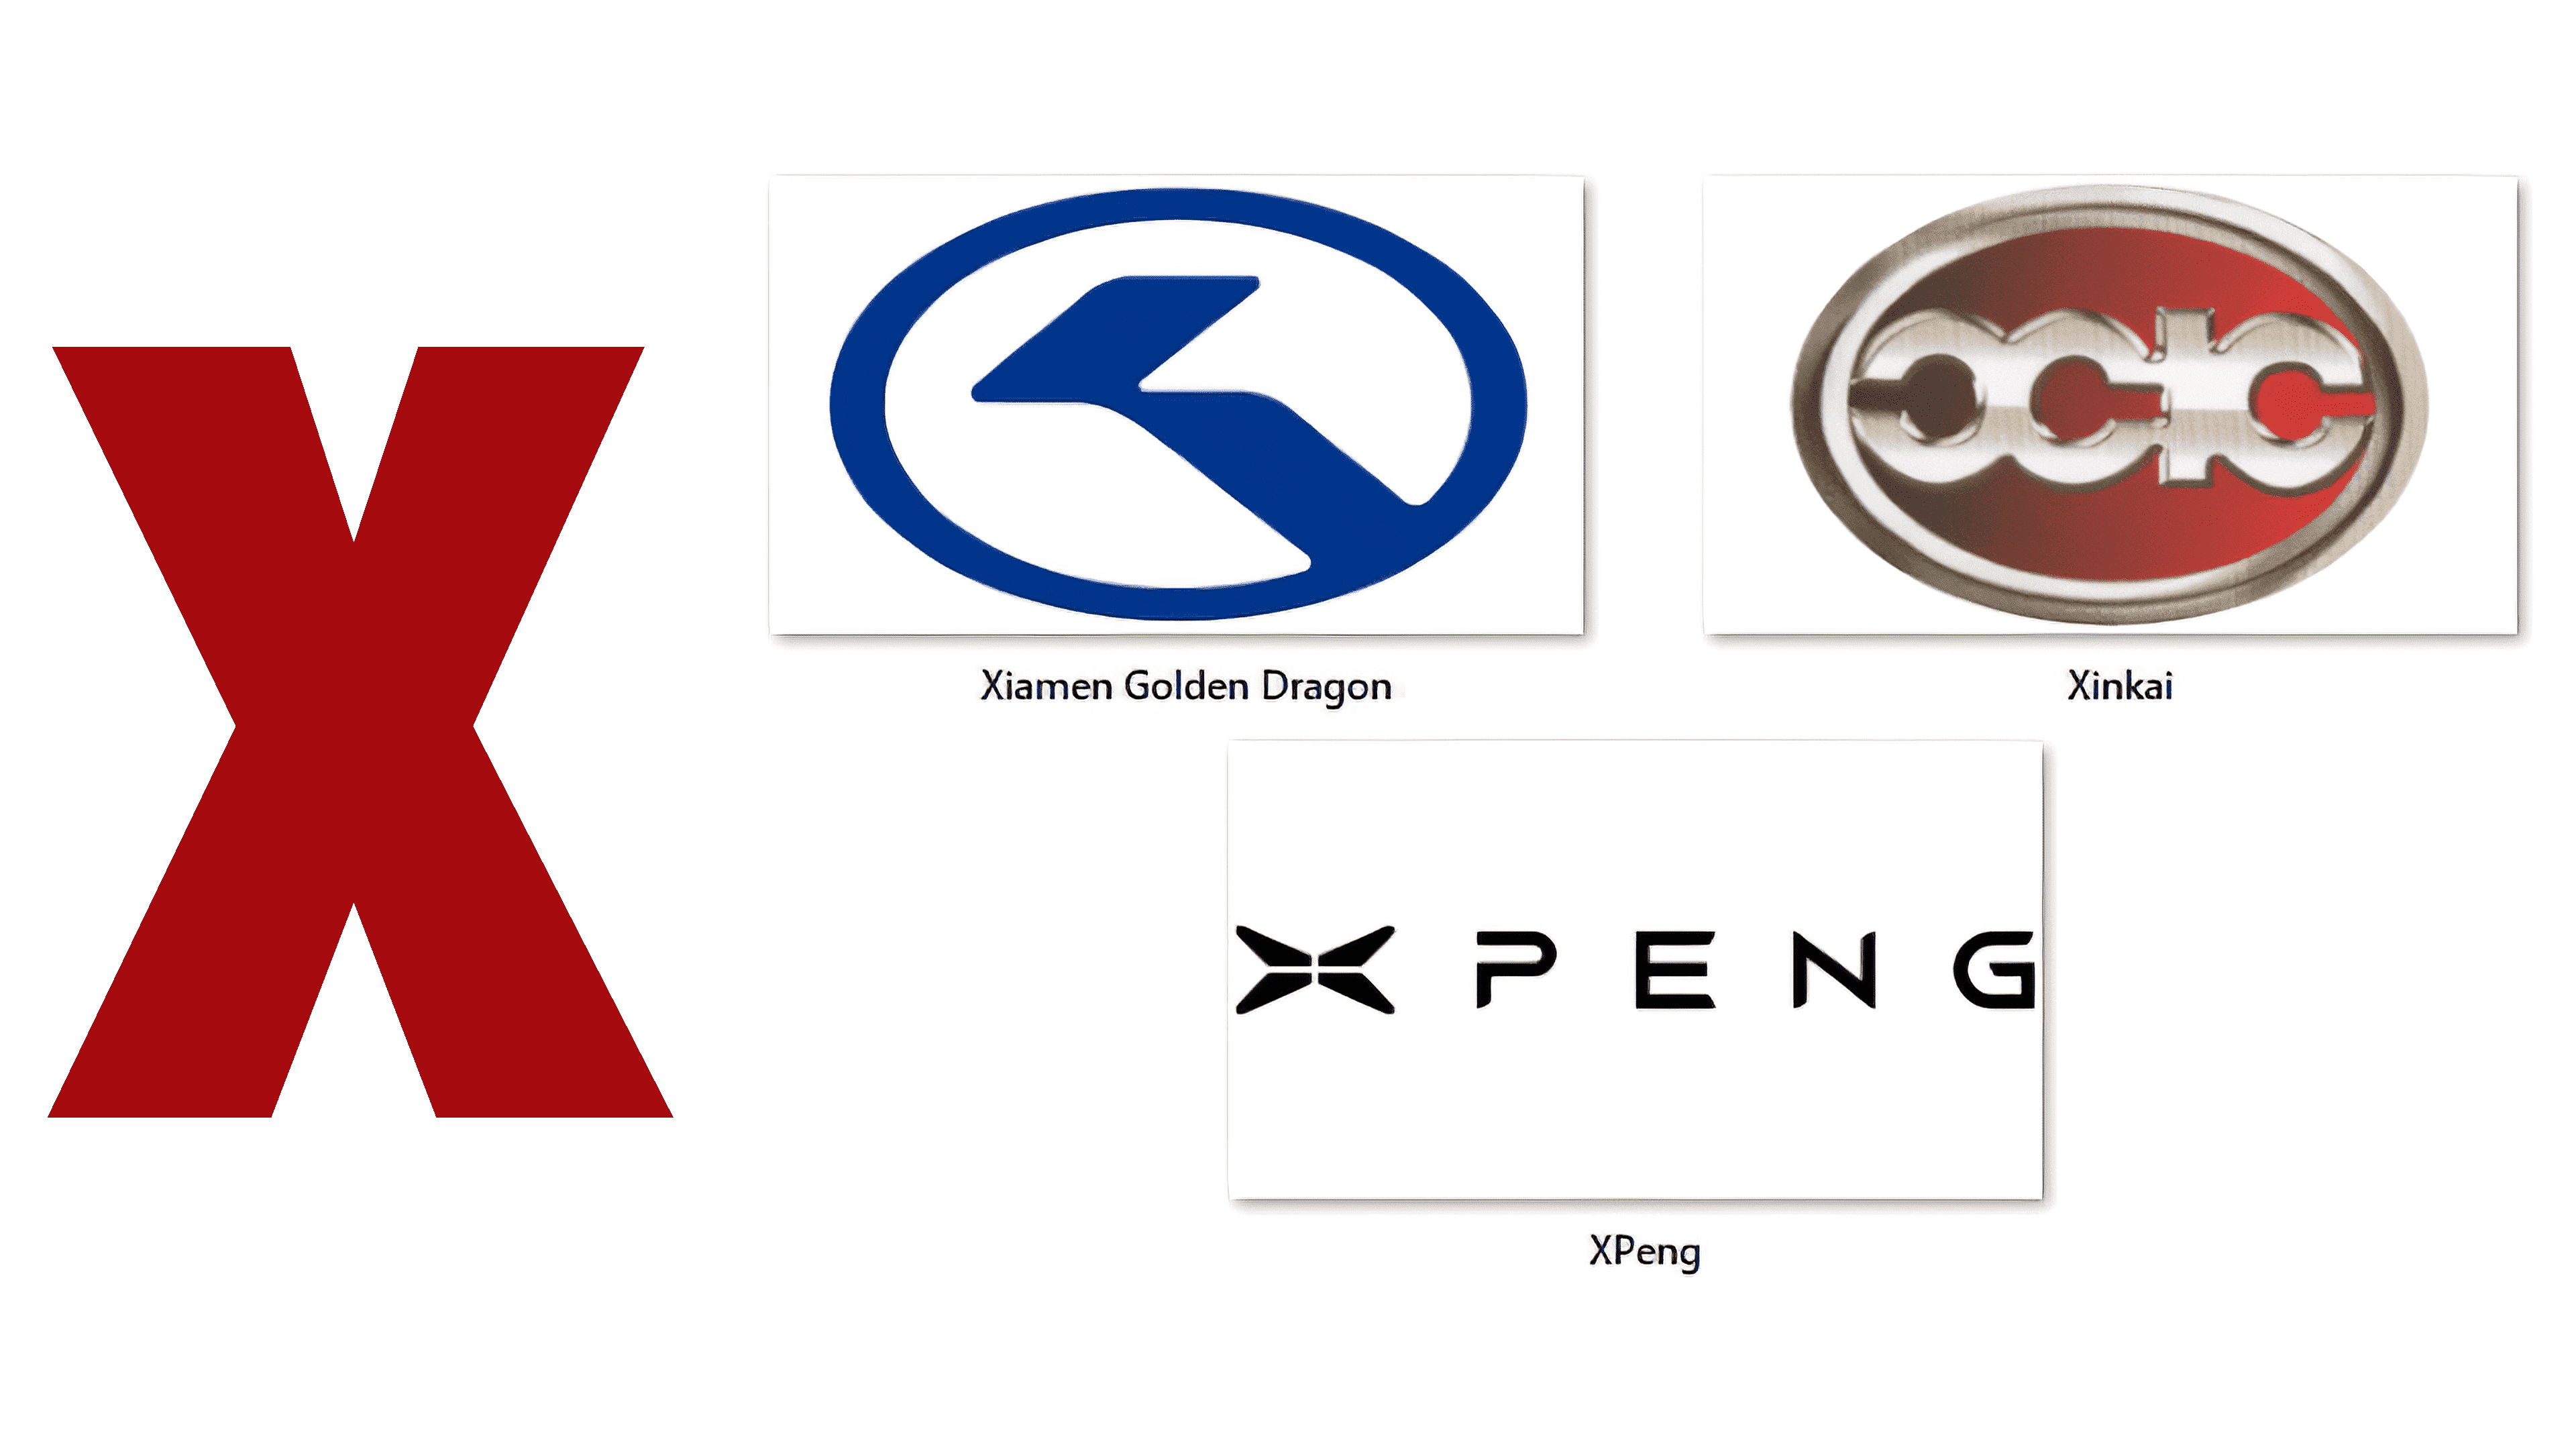 Car brand that starts with x